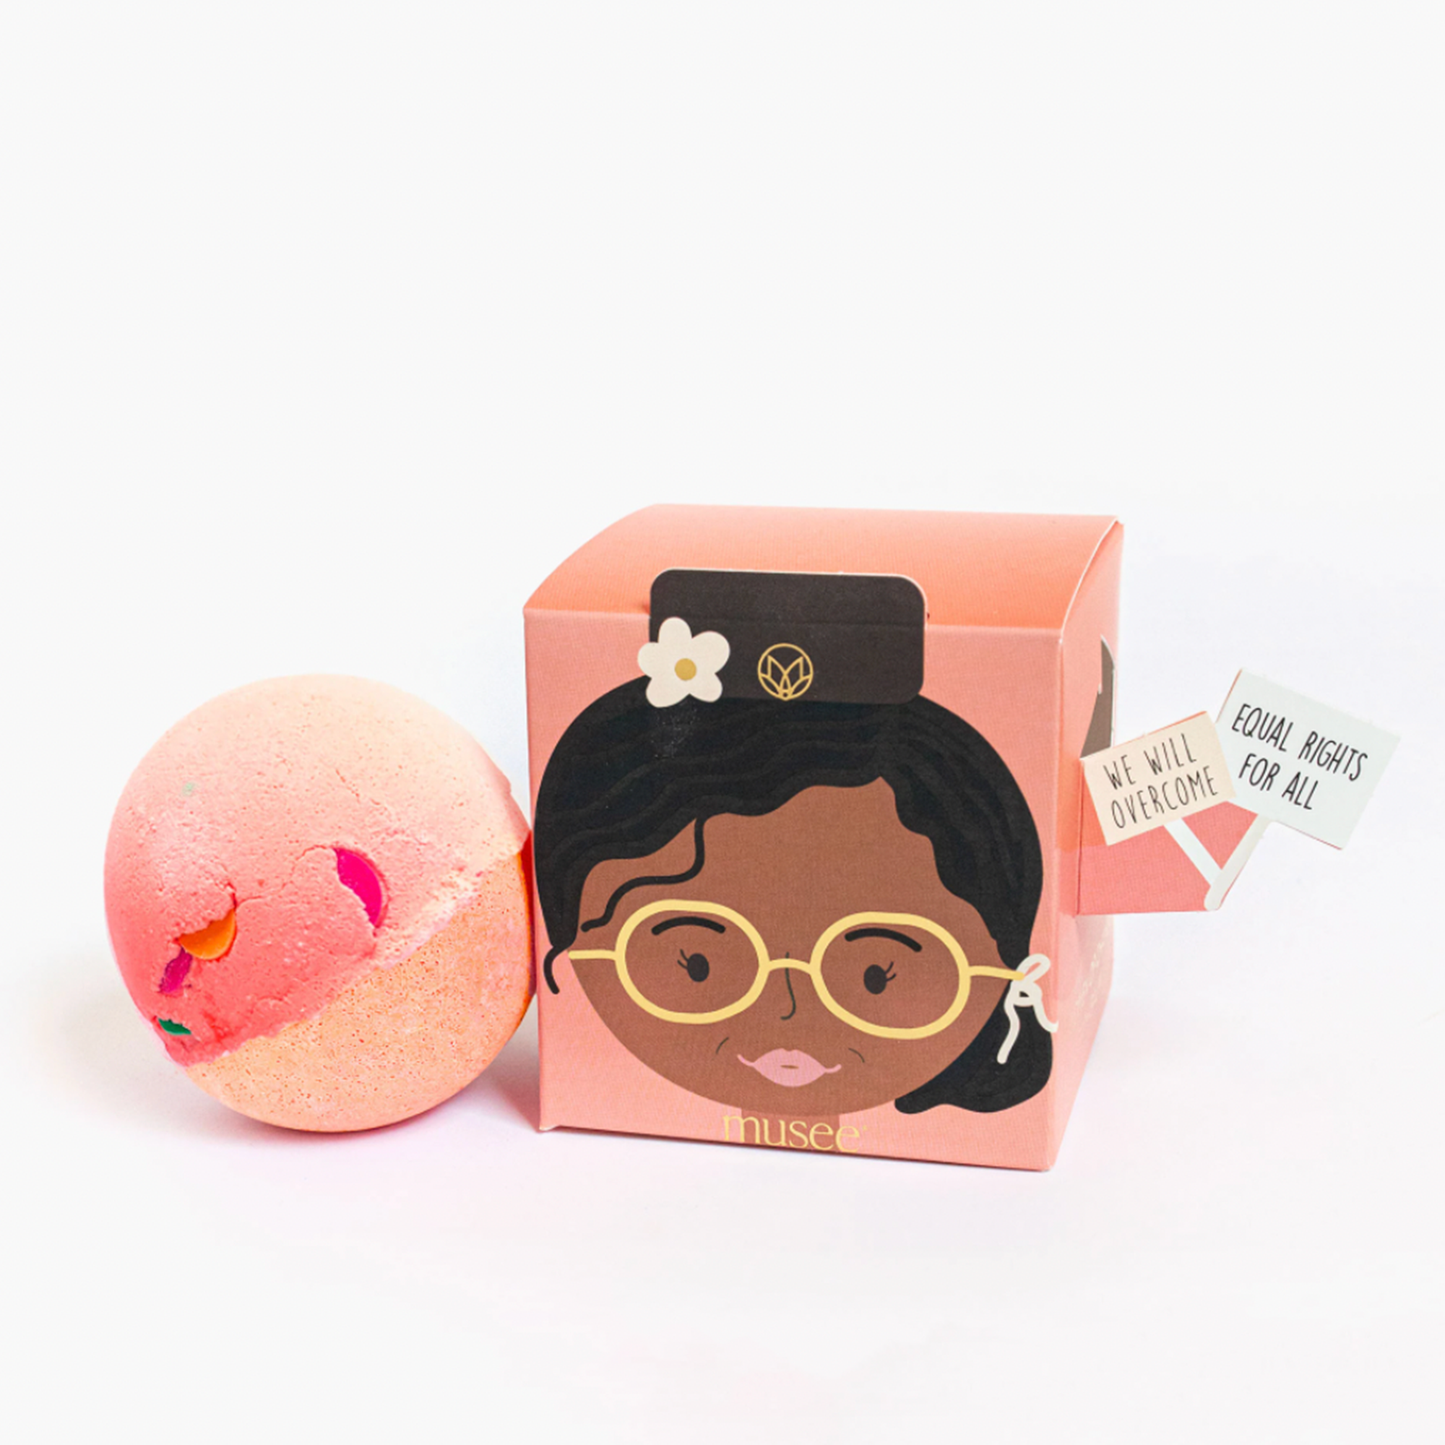 Women of Change Bath Balm Rosa Parks. Rosa Parks was nationally recognized as the "mother of the modern day civil rights movement" in America. Her quiet, courageous act changed America, its view of black people and redirected the course in history